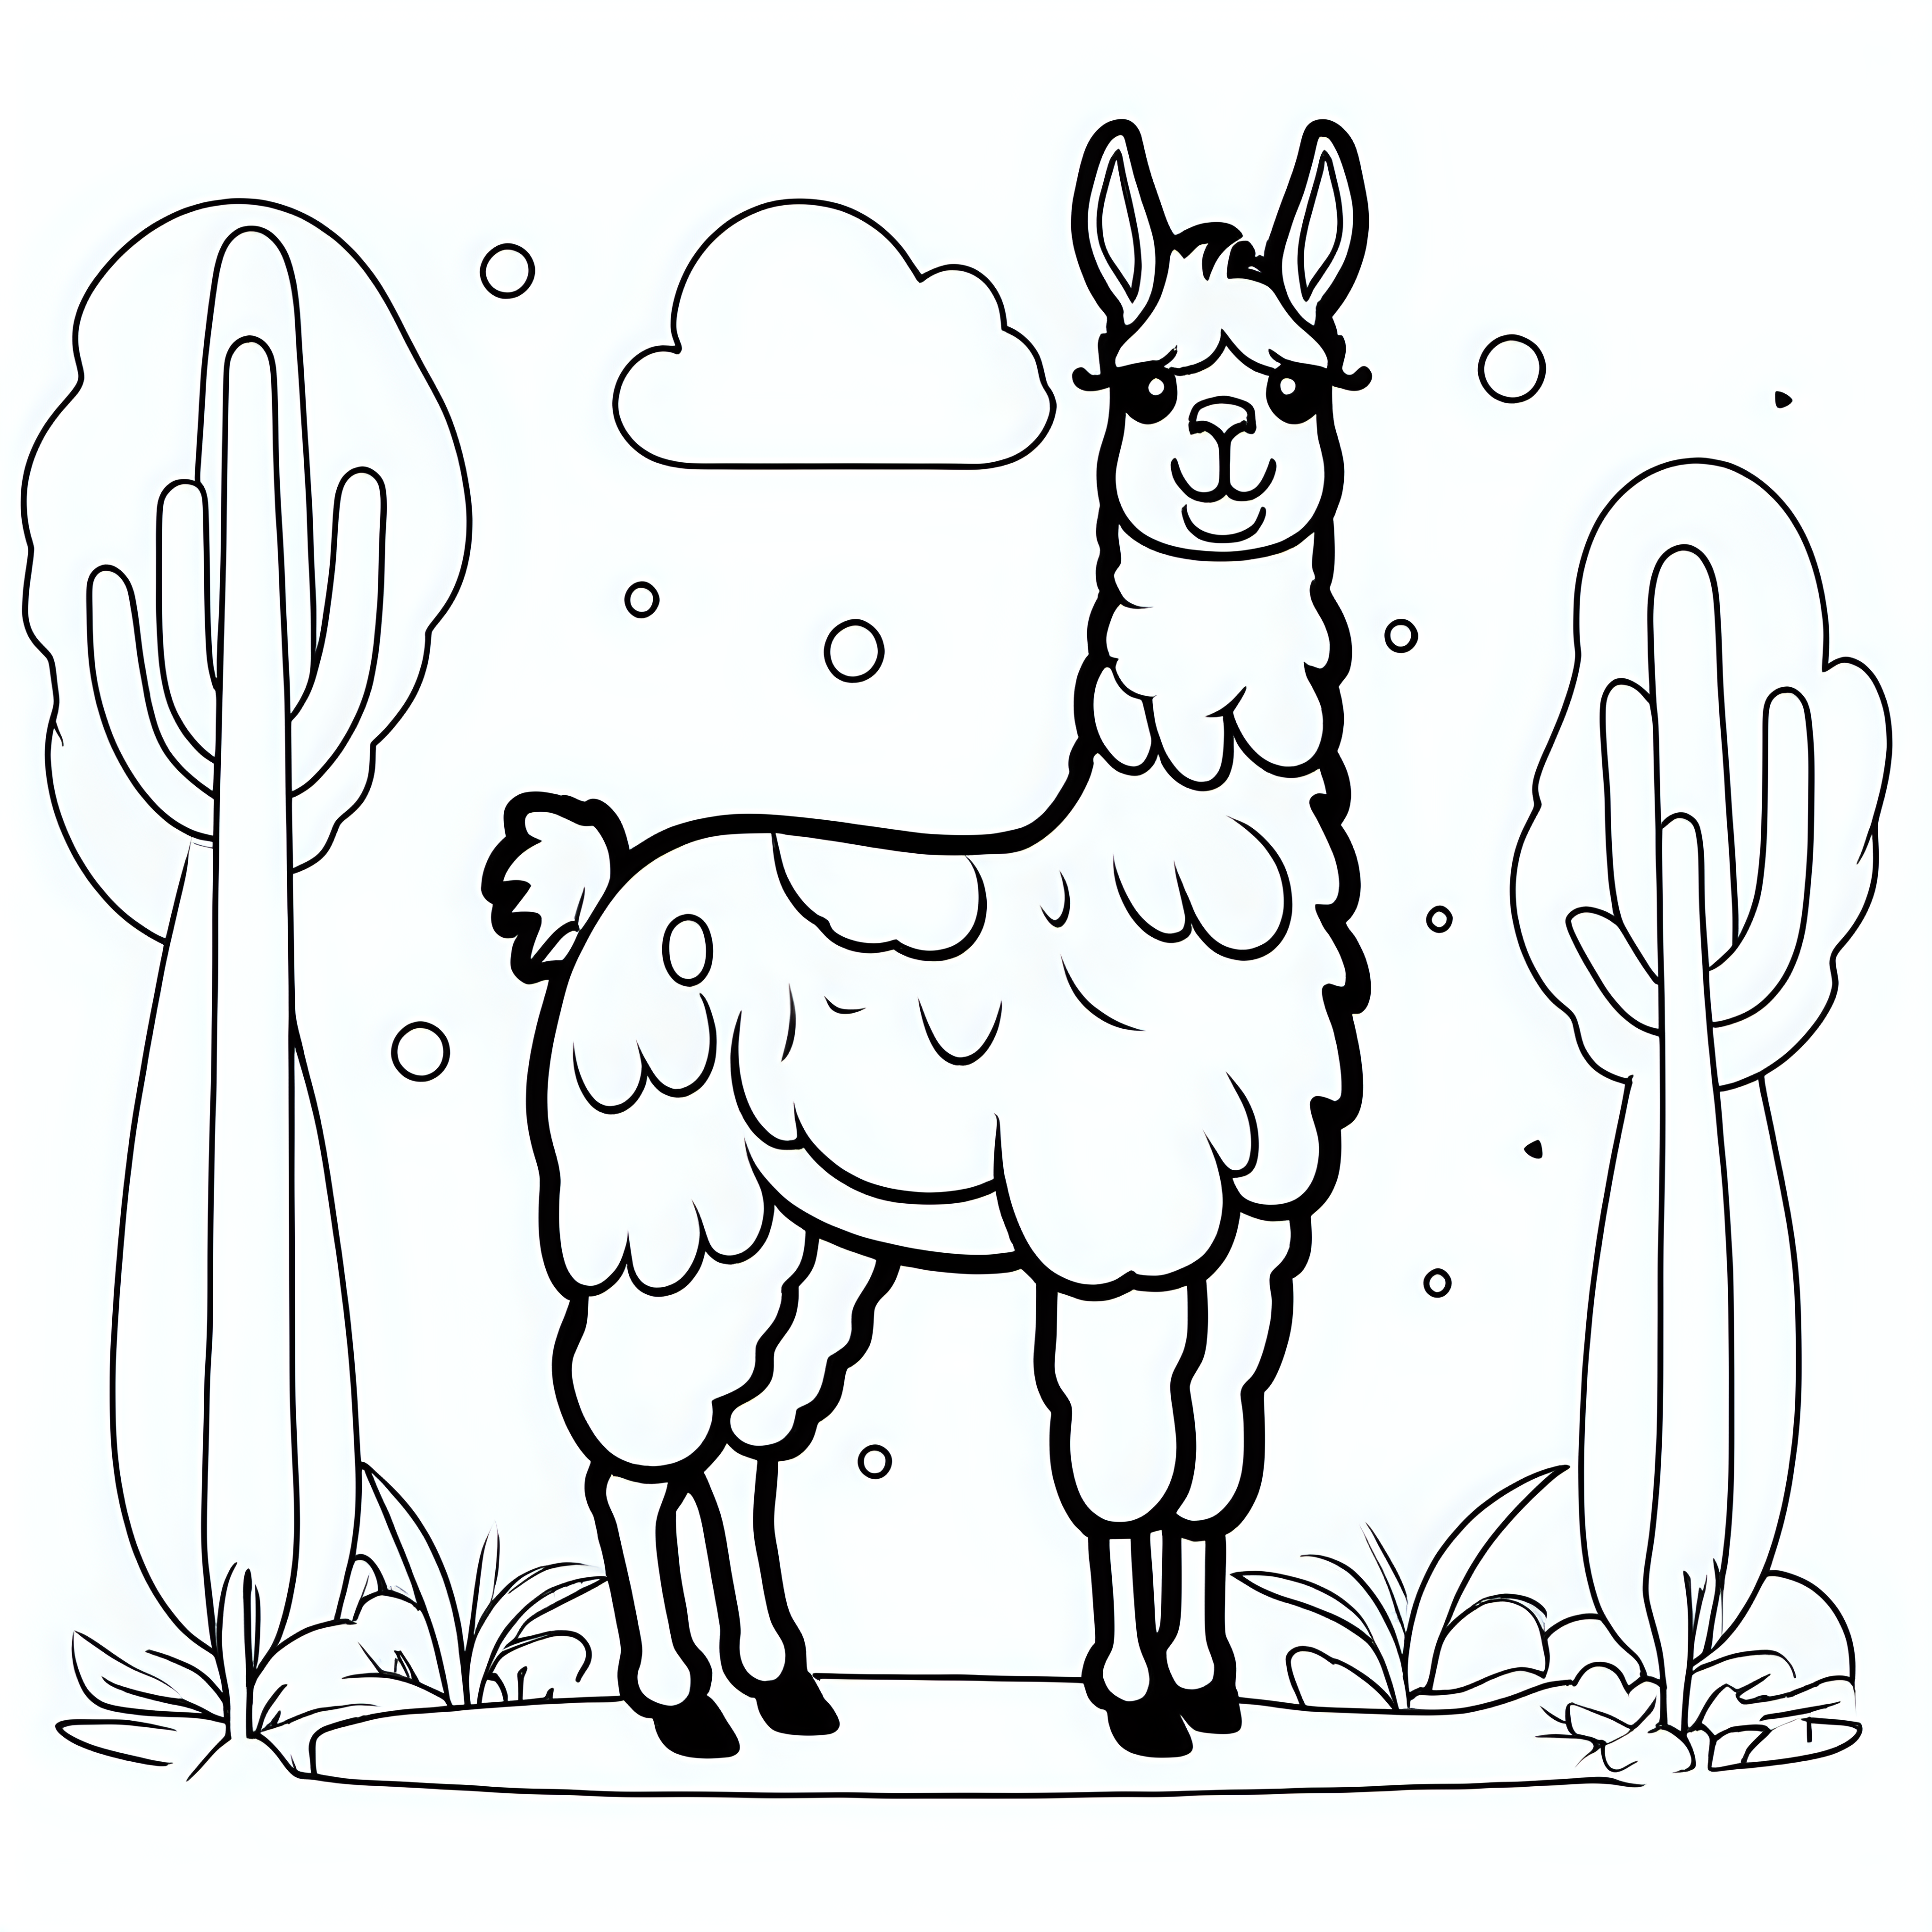 draw a cute llama animal with only the